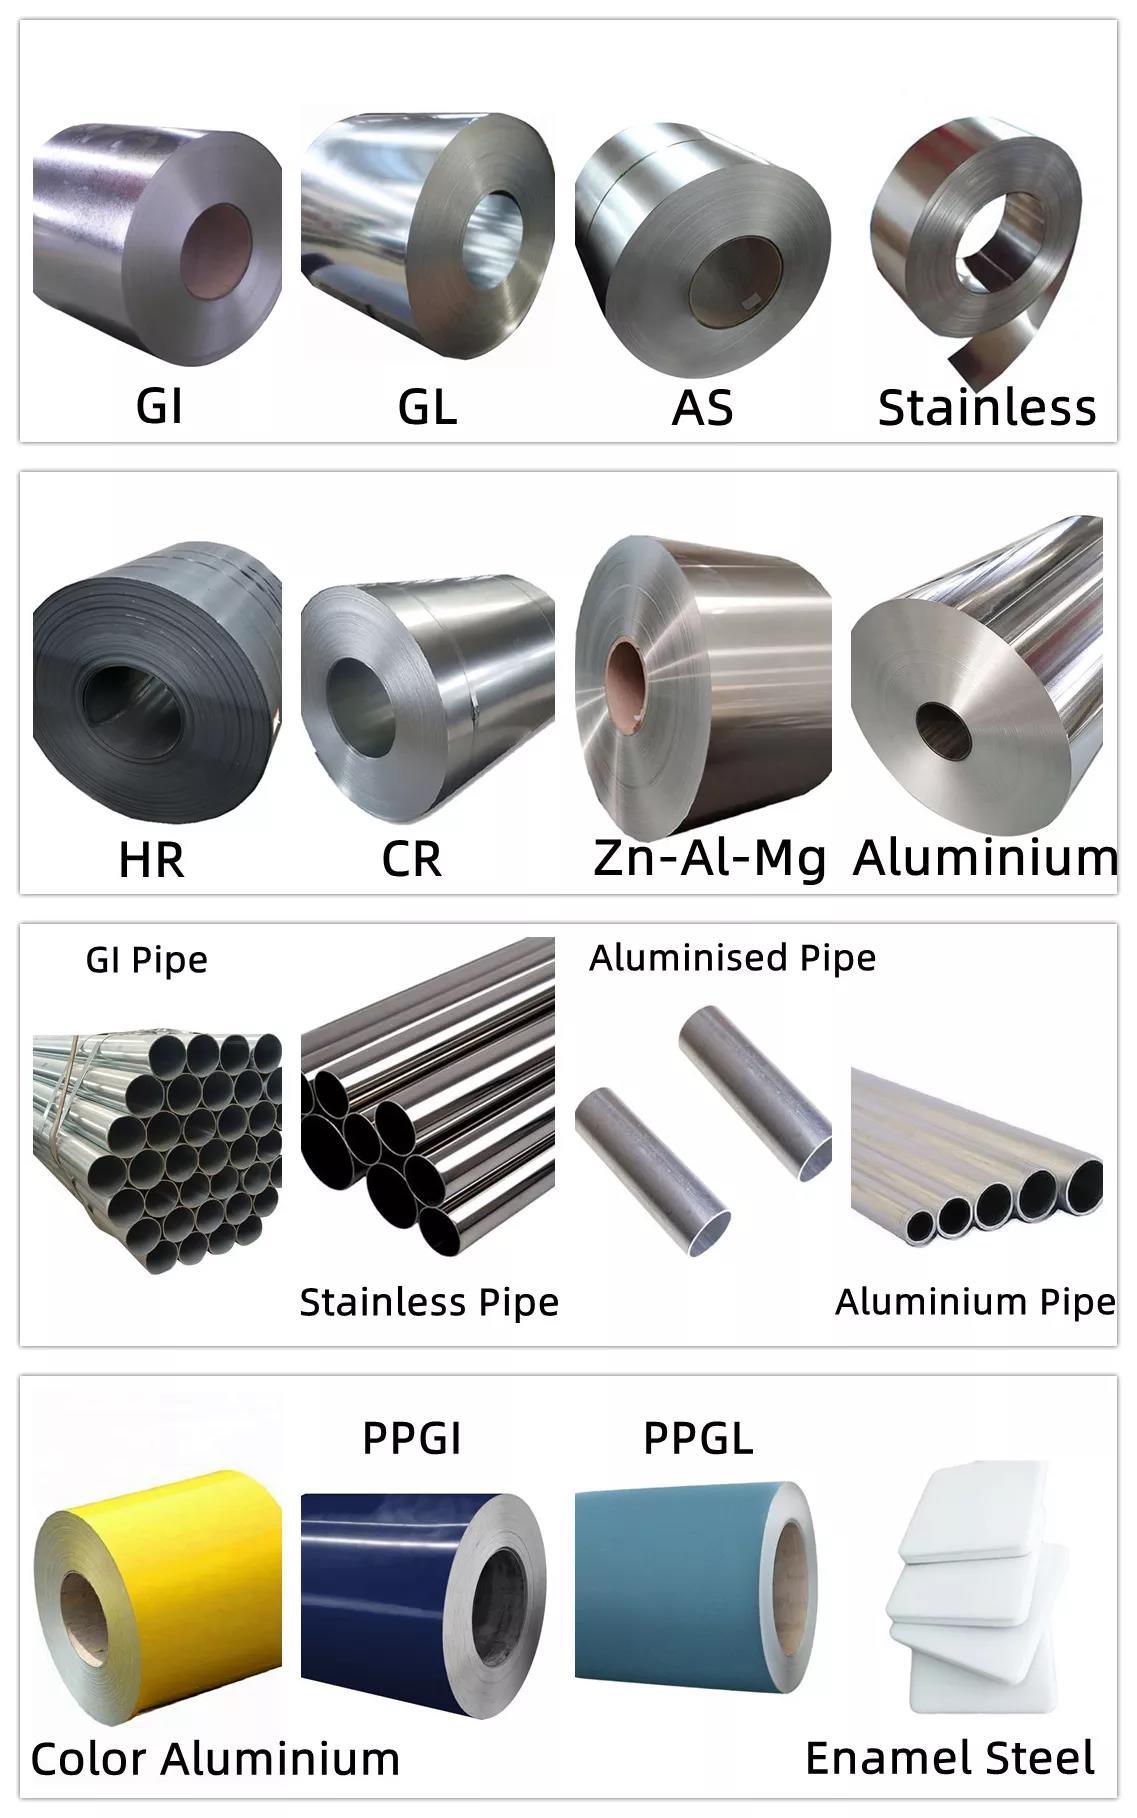 Main products: #PowderCoatedSteel #PrepaintedGalvanizedSteel #PrepaintedGalvalumesteel #ZAMSteel #AluminizedSteel #GalvanizedSteel #GalvalumeSteel #GalfanSteel #SteelPipe #ColdRolledSteel #ContainerHouse #HeavyAnticorrosionPaint #Machinery 15 years, 75 countries, 480+ clients domestically and worldwide! Largest private coating steel supplier in northeast China. Wind Vane company of price in mainstream media.  Council member enterprise of Chinese Steel Export Union. Council member enterprise of Chinese Northeast Steel Structure Union.  Chinese top 50 coating products supplier in 2019. Chinese top 100 steel products supplier in 2020. Chinese top 30 coating products supplier in 2020.